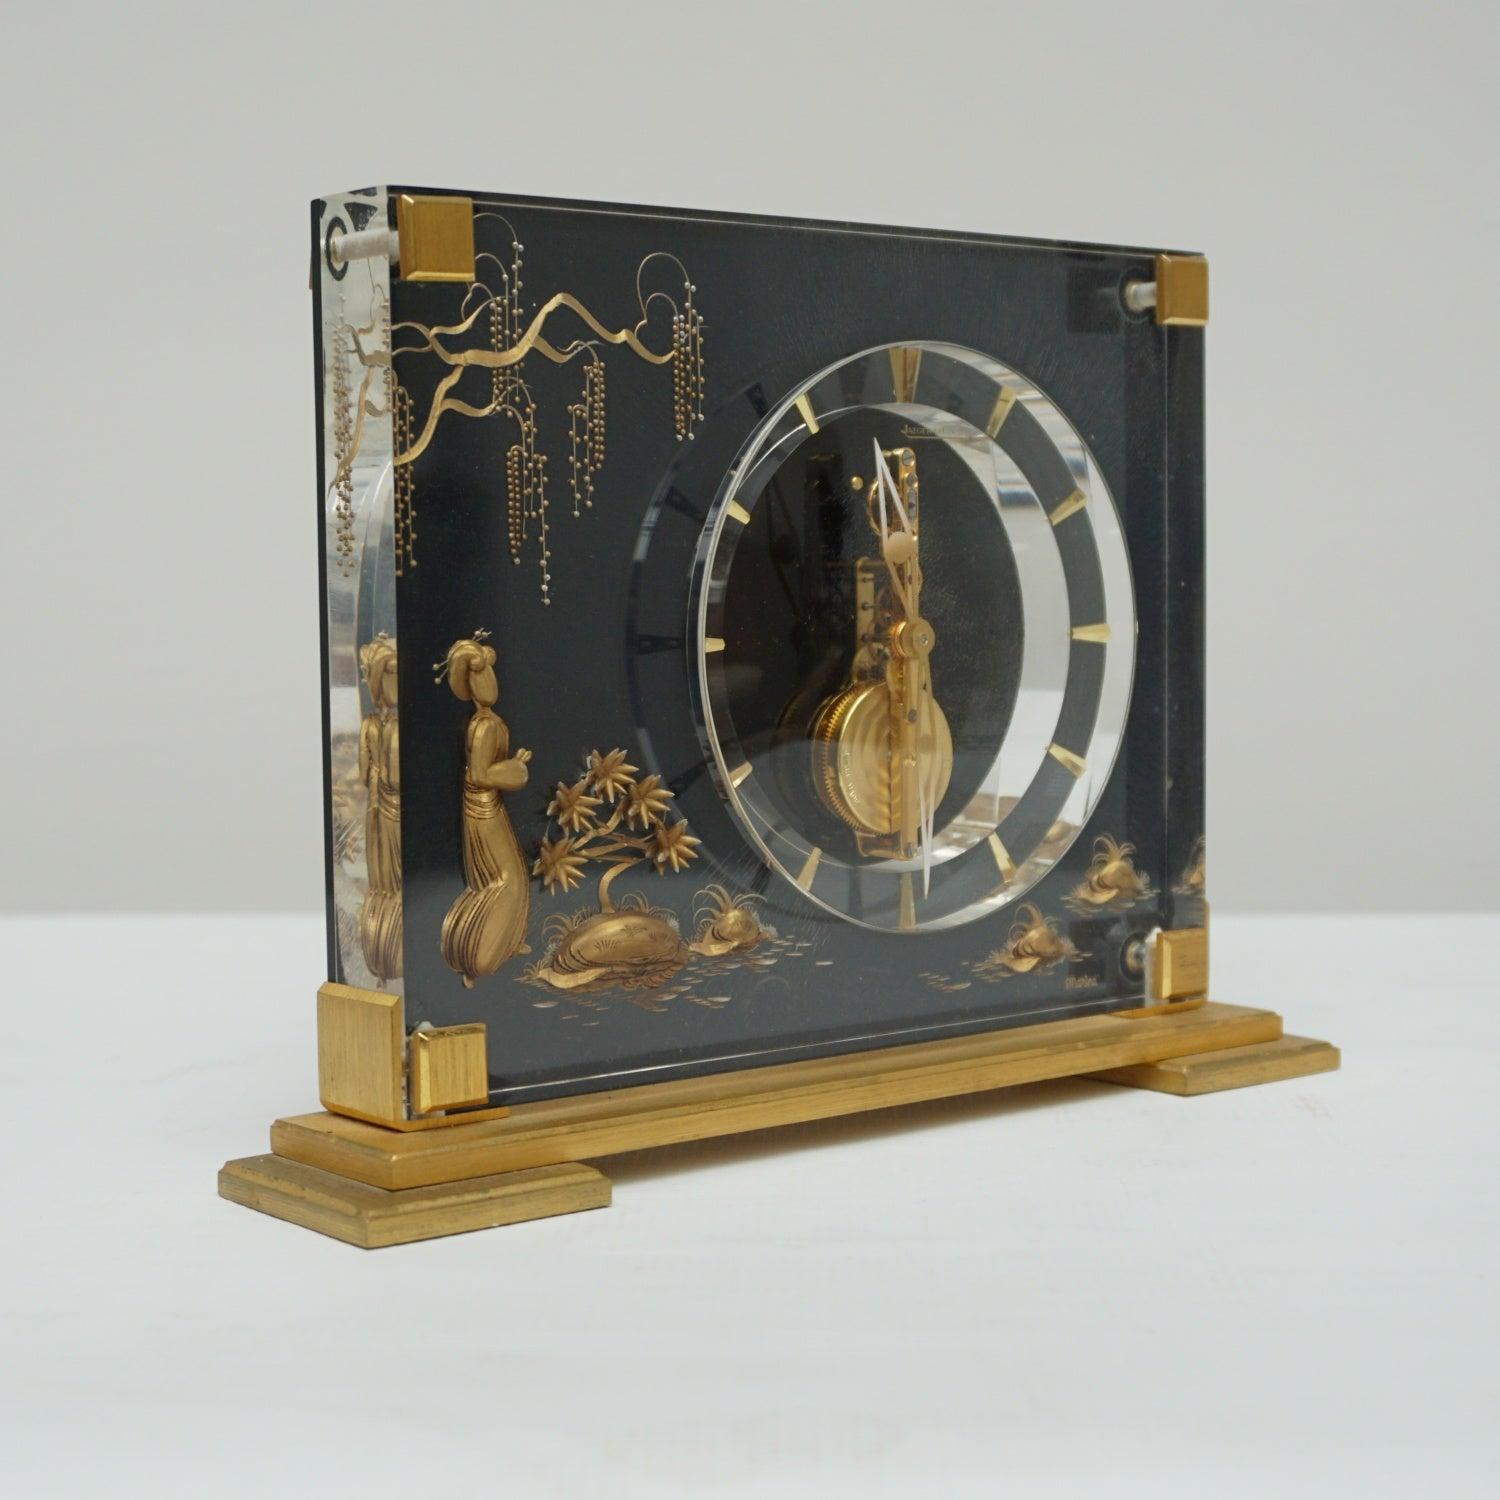 A mid-century Jaeger-LeCoultre mantel clock in a Lucite case with inset brass decoration featuring a young girl amongst the lily pads with an overhanging branch above. Set over a gilded Brass stepped base. Eight day movement by Jaeger-LeCoultre with